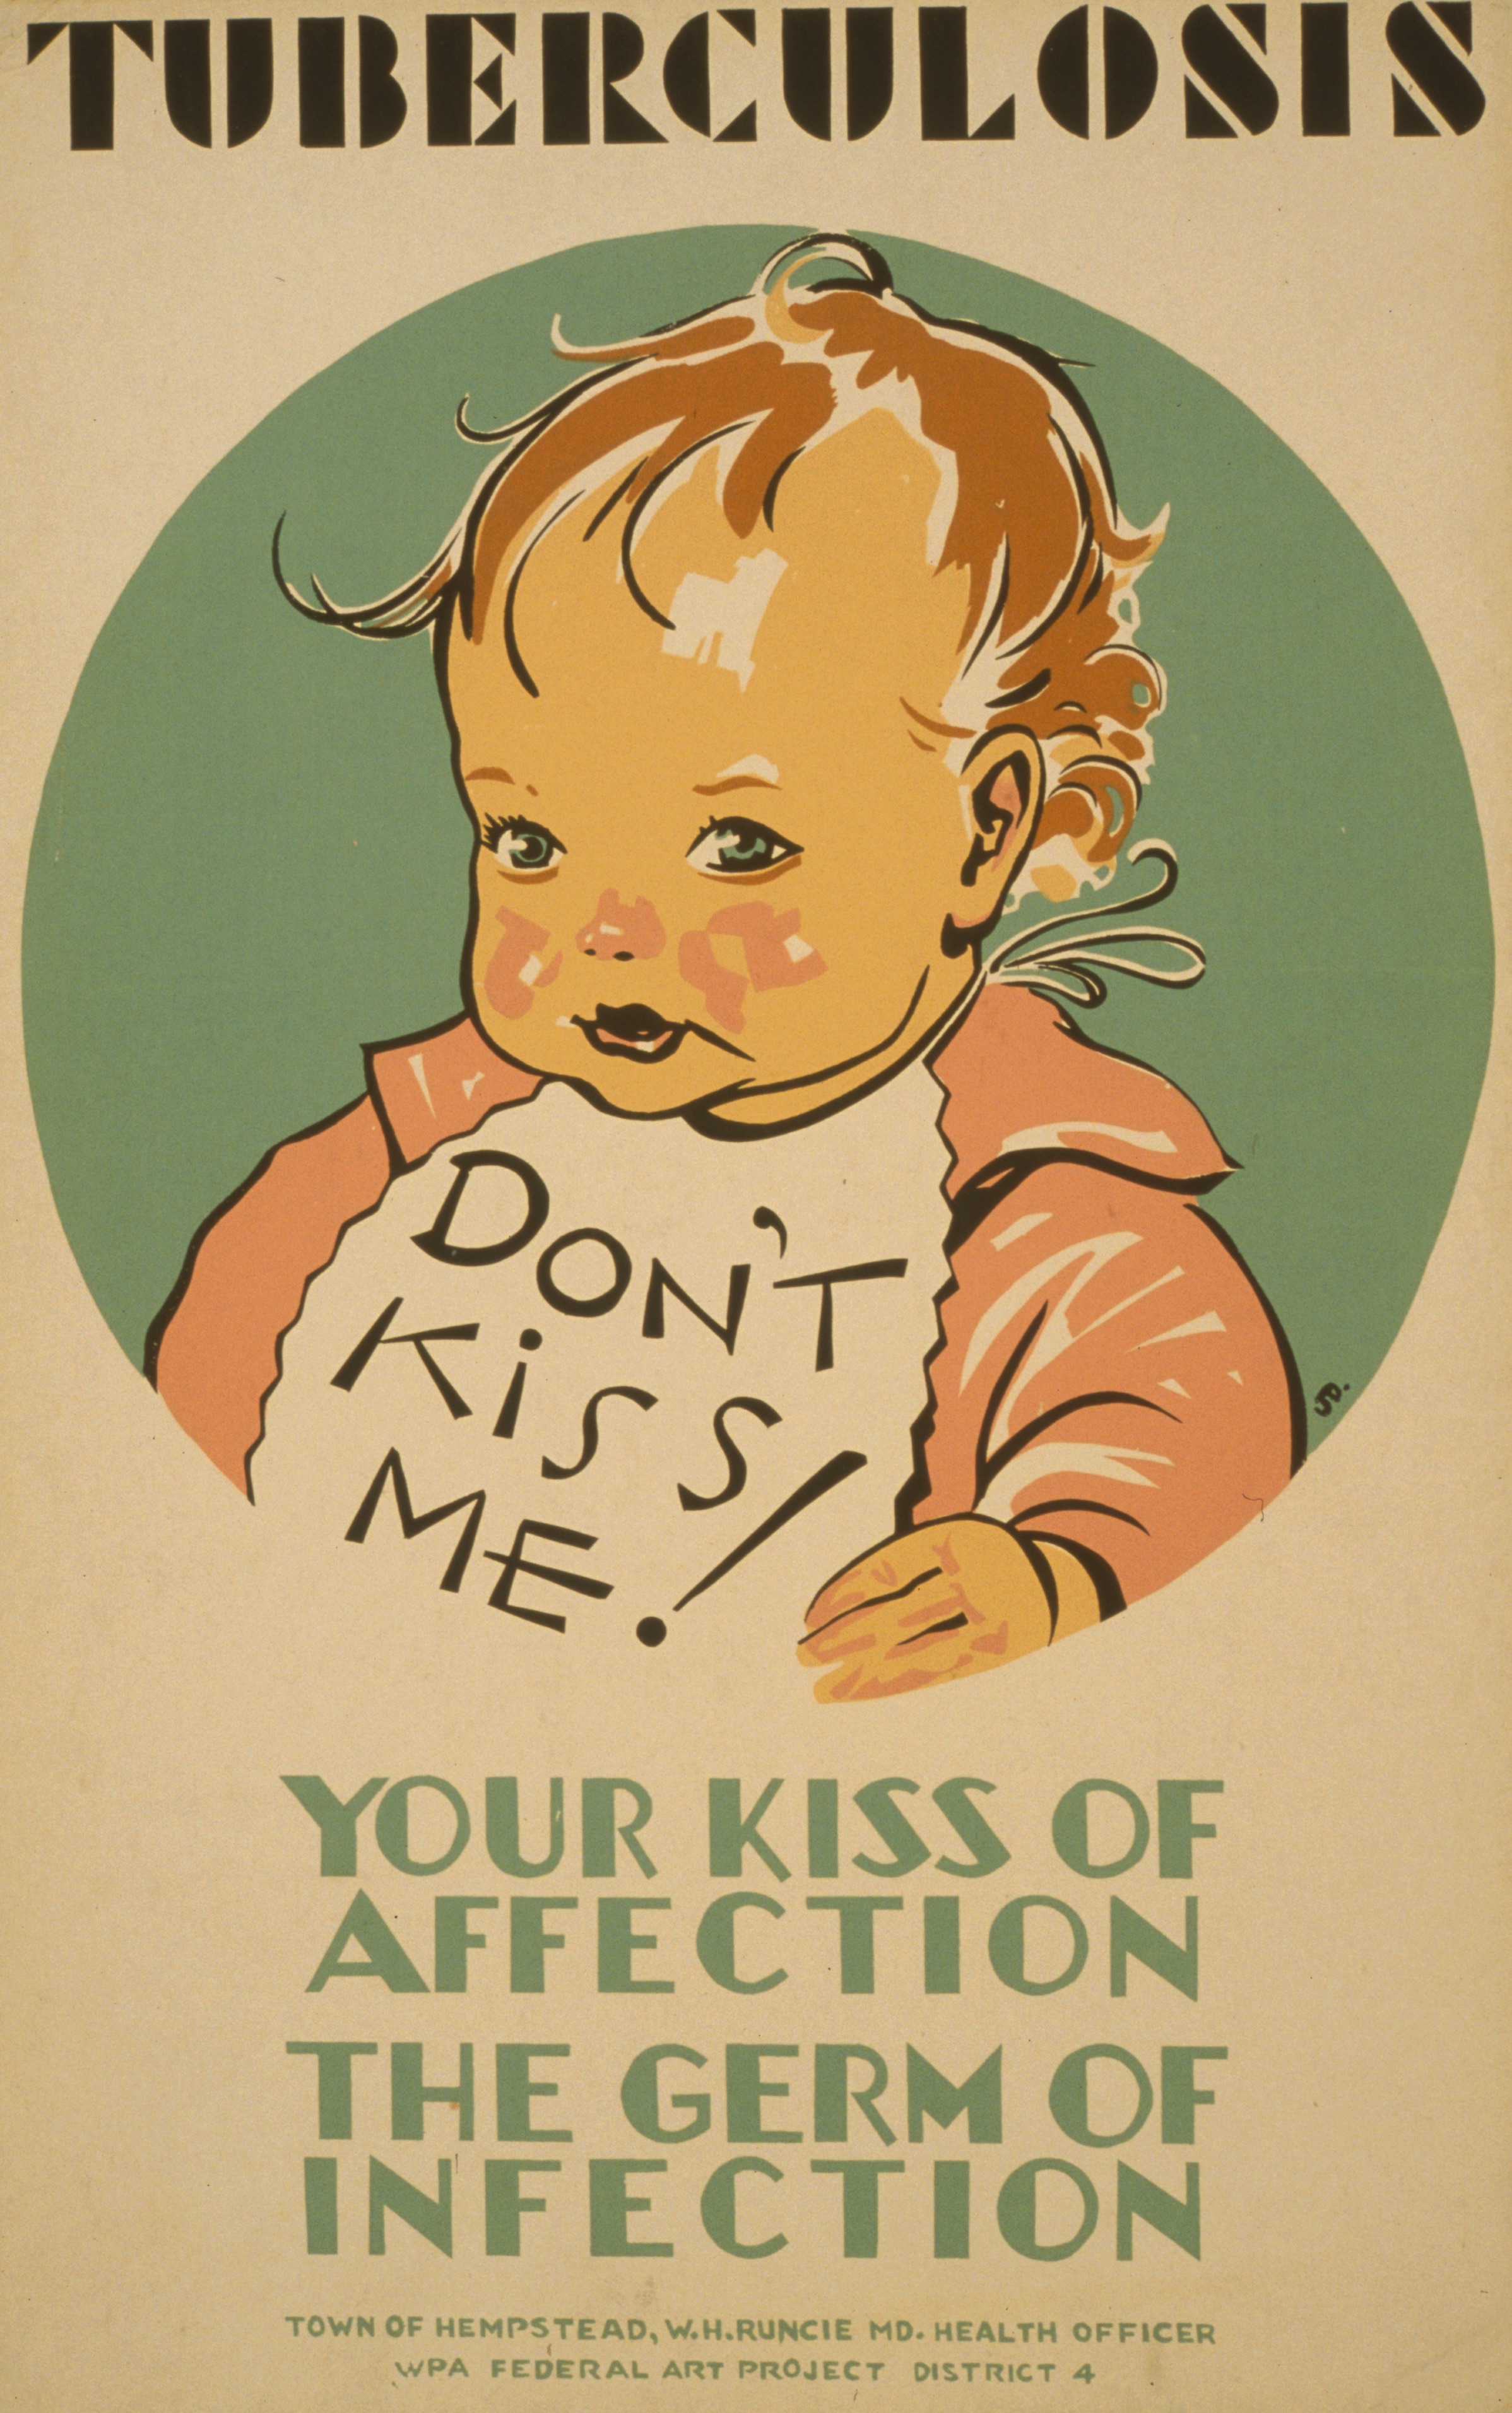 An anti-tuberculosis poster, with a baby wearing a bib saying "Don't kiss me!"